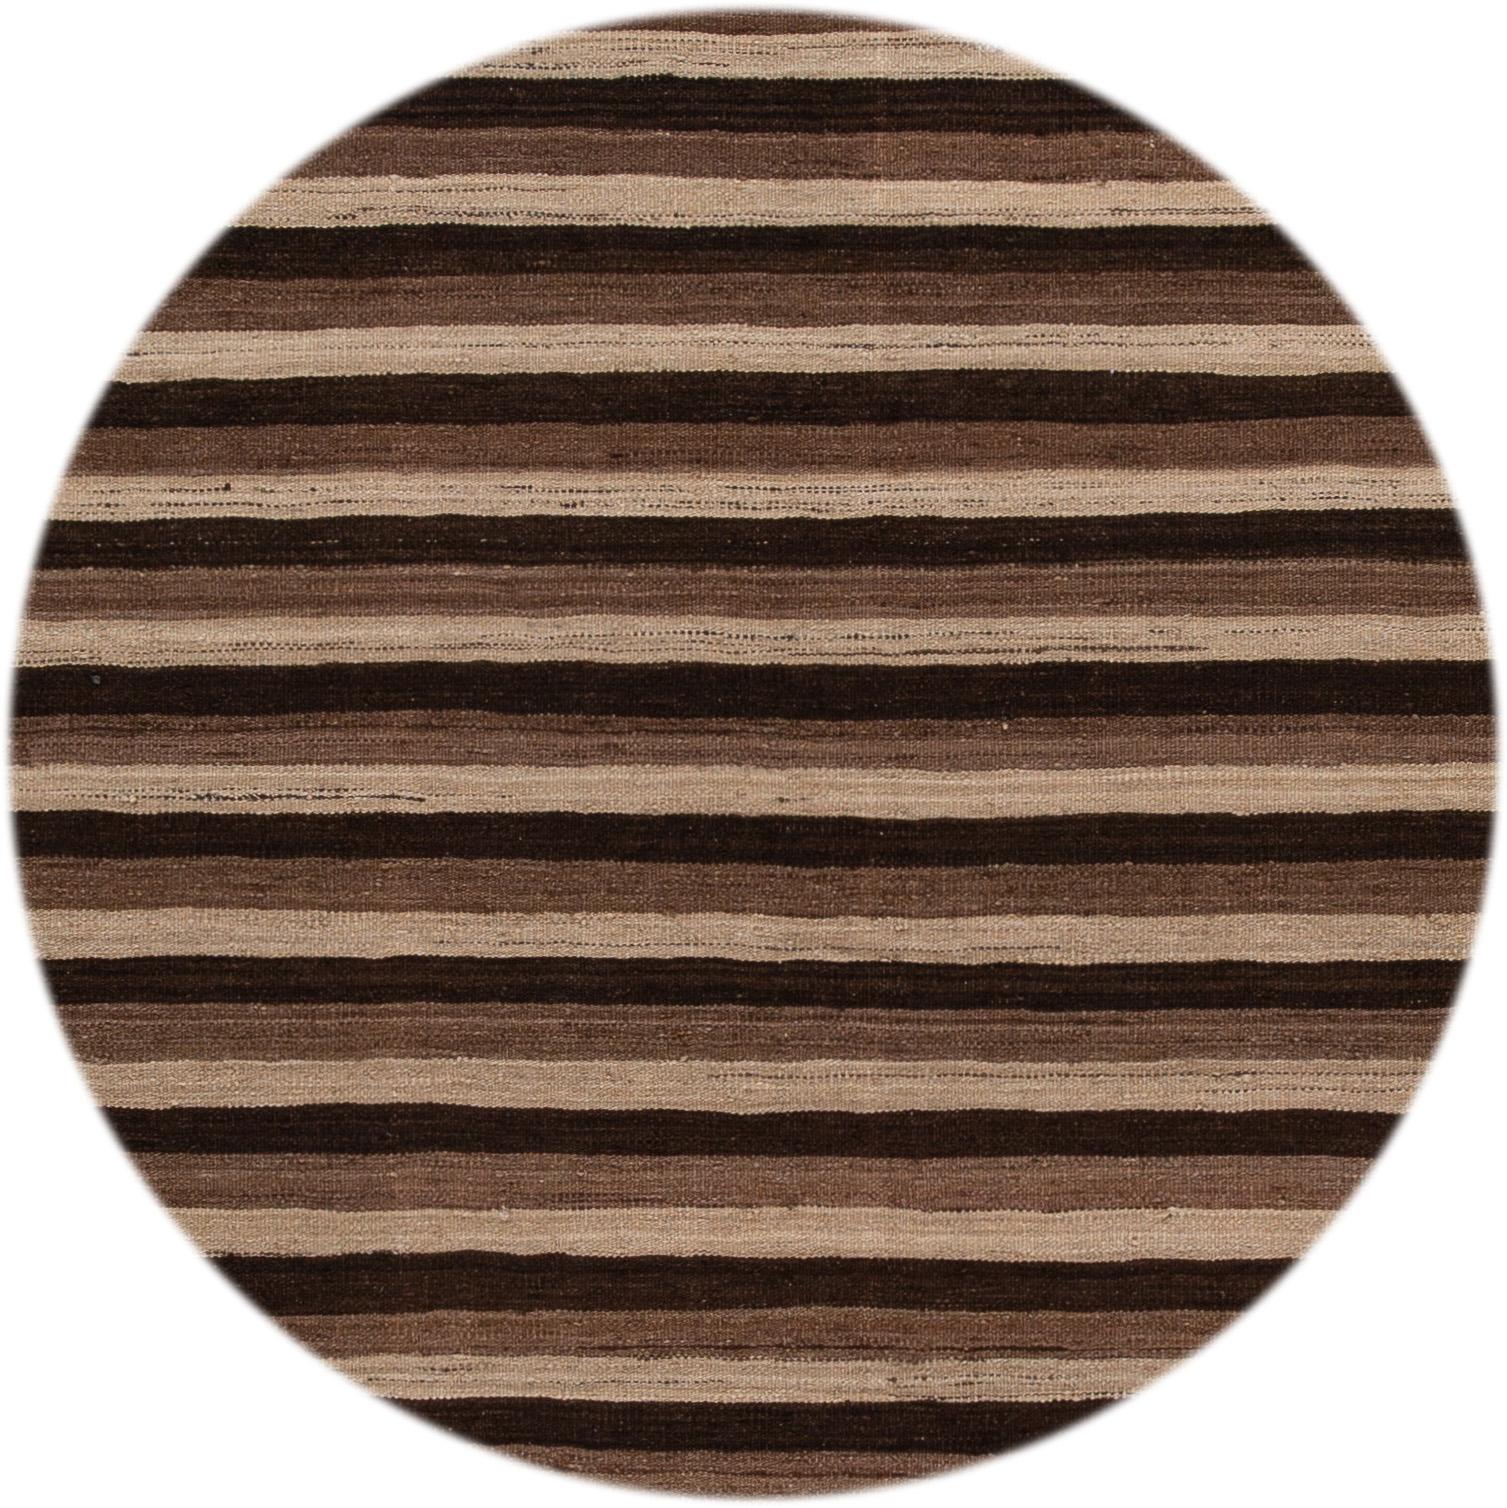 Beautiful hand knotted contemporary flat-weave kilim wool rug. This rug has brown, beige, and black stripes in an all-over design.

This rug measures 9' 3